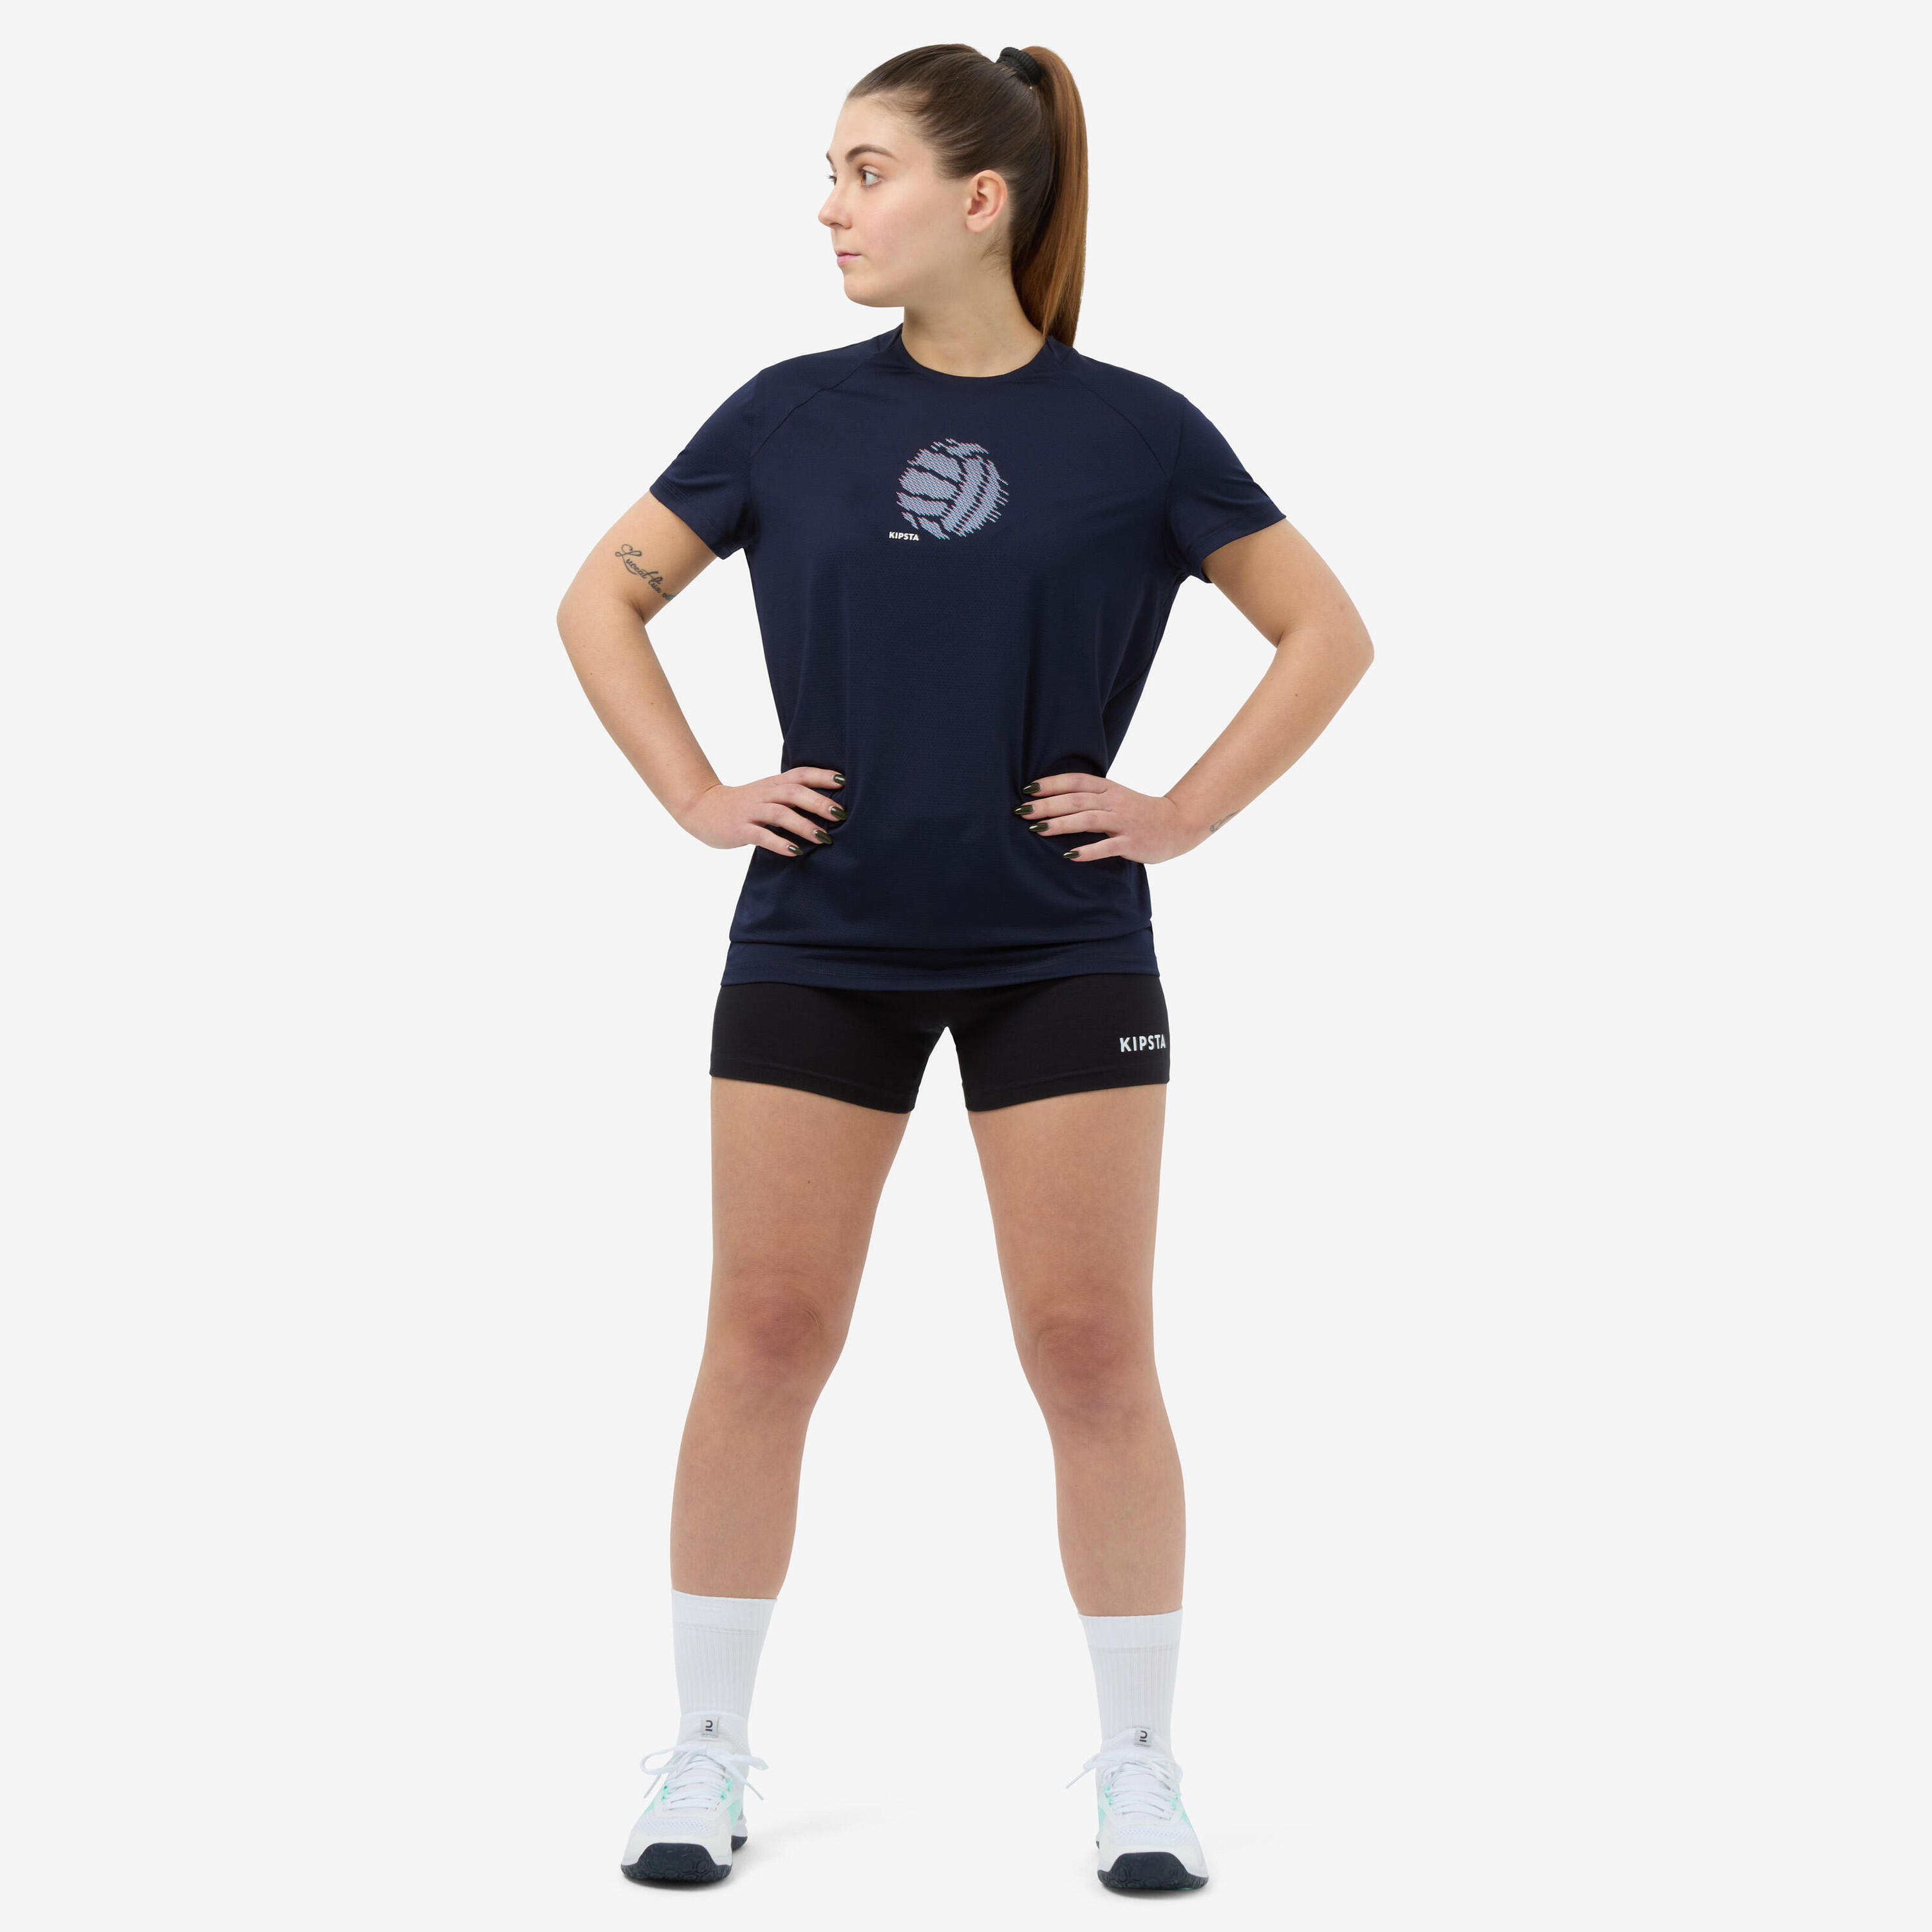 Womens Volleyball Shorts.